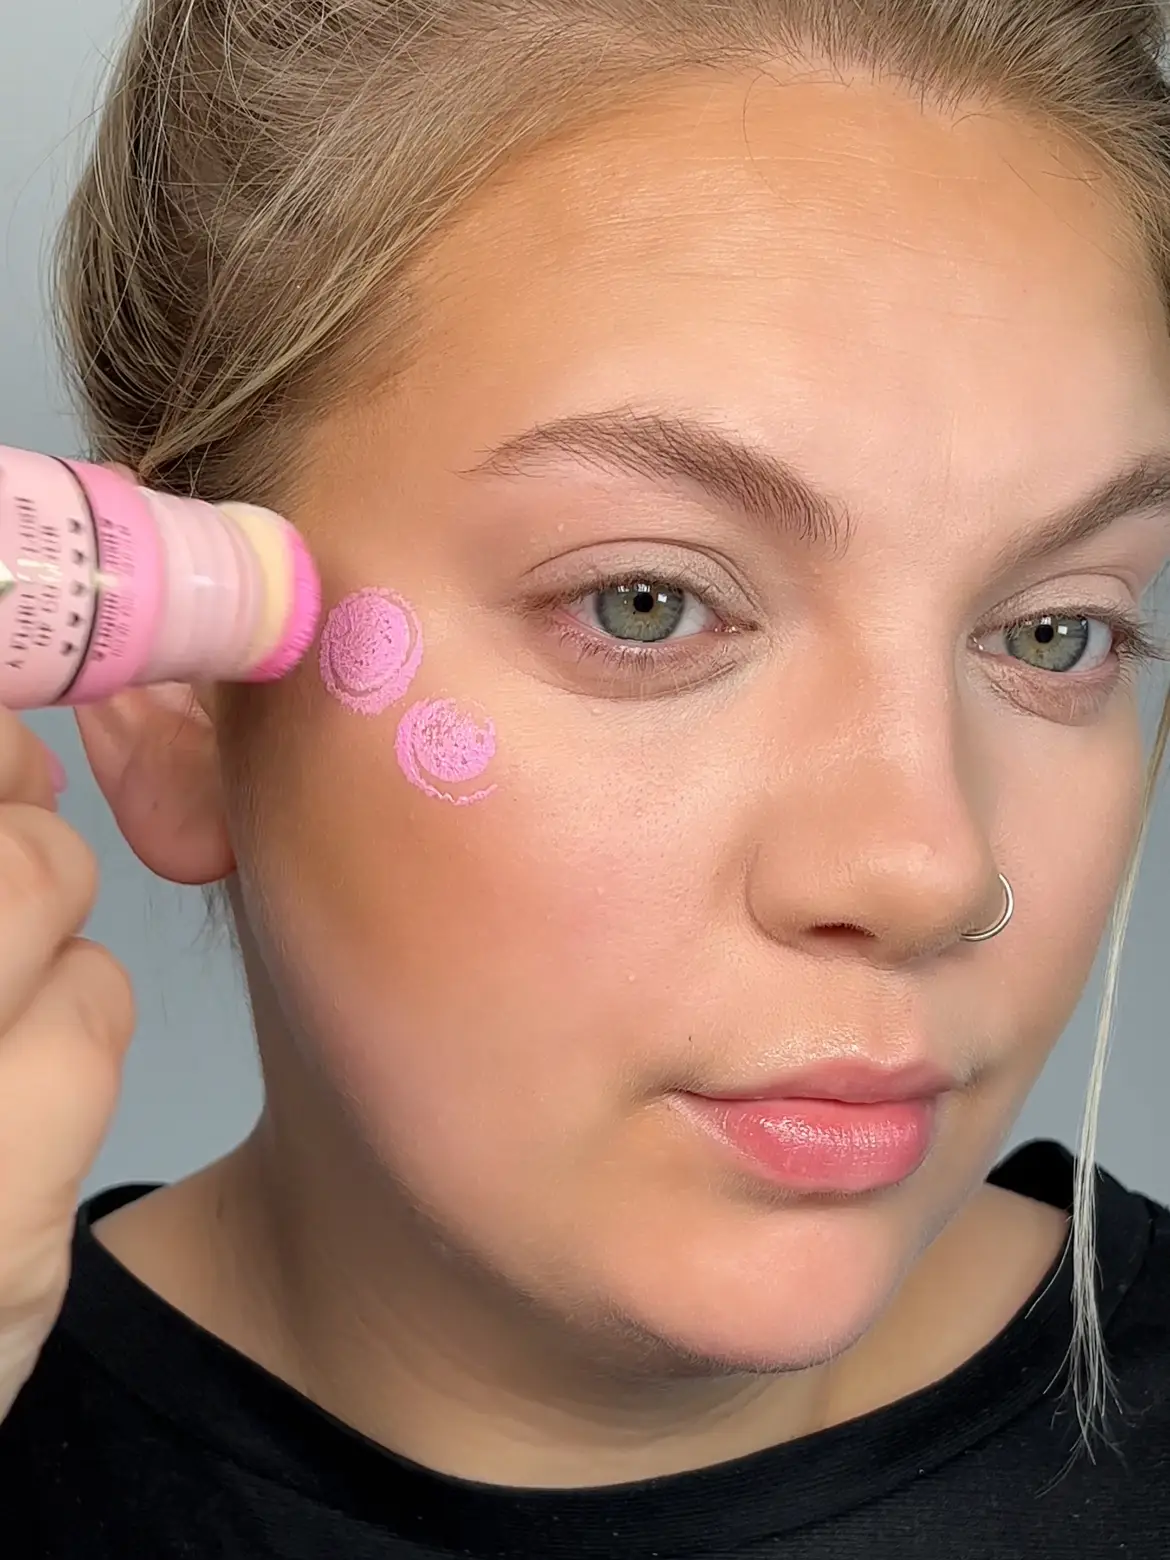 TRYING THE PLOUISE LEGALLY PINK LIQUID BLUSH UNDER MY EYES 